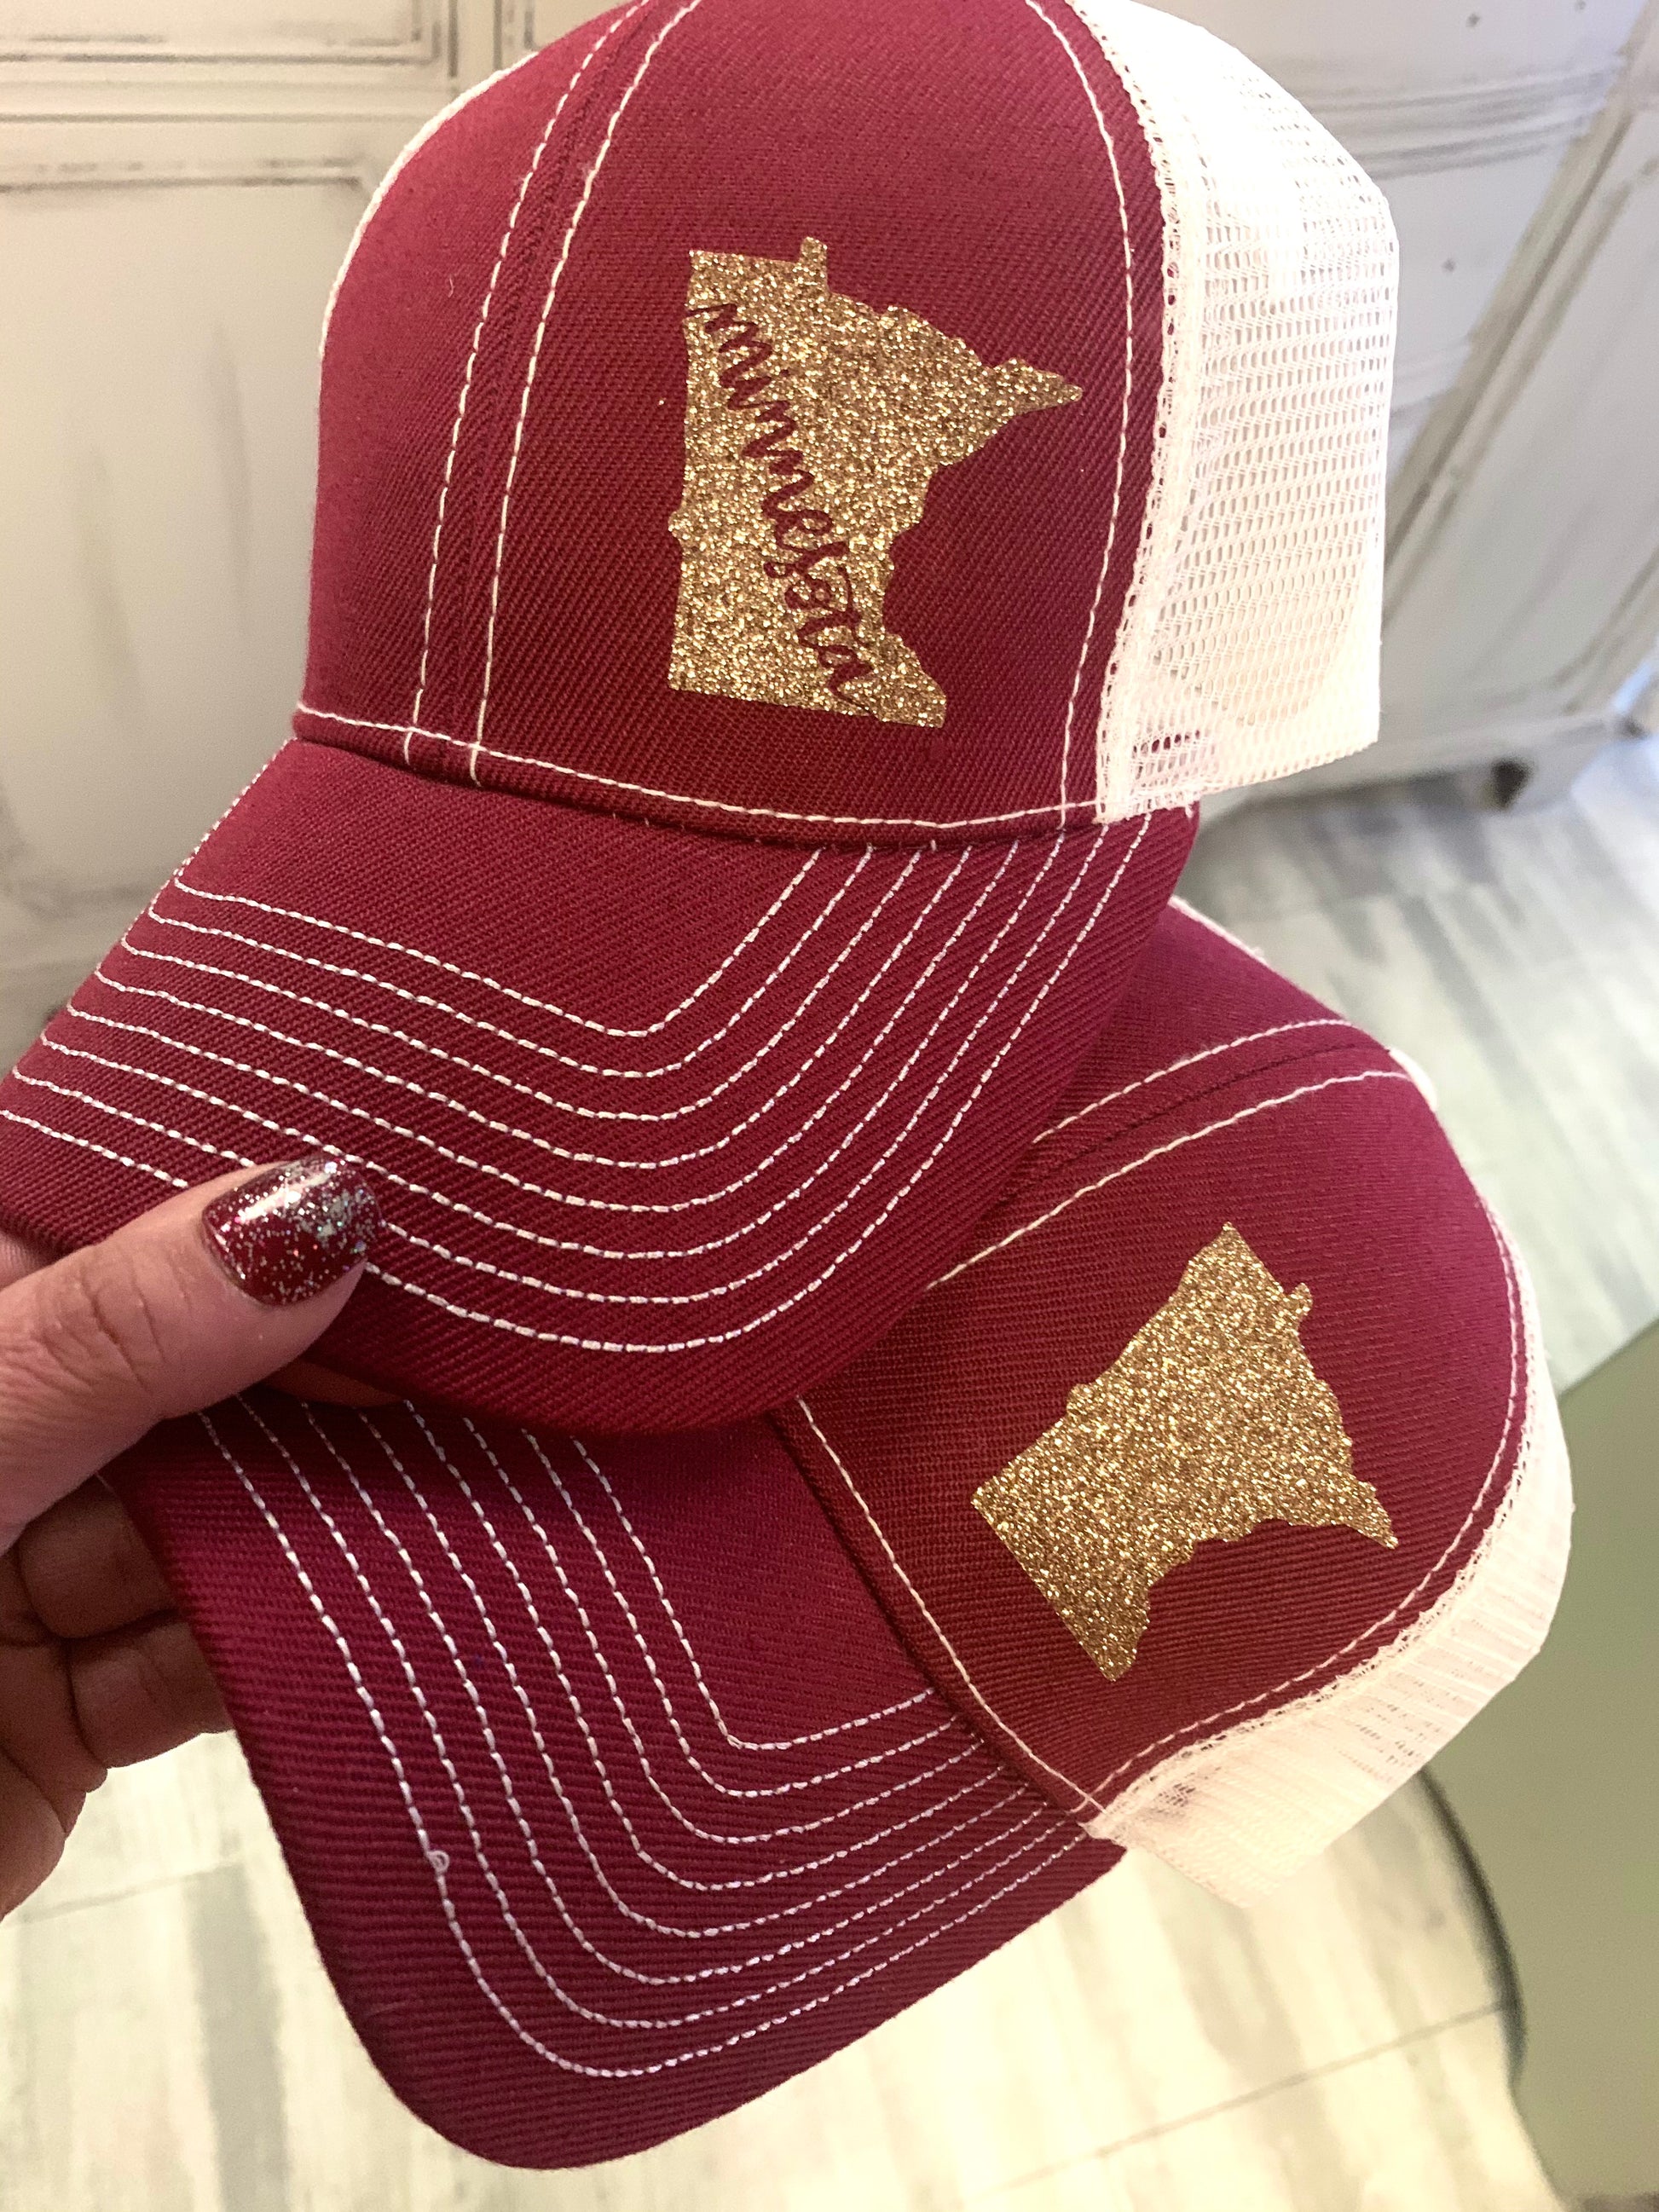 Minnesota Golden Gophers hat Maroon white gold glitter state of Minnesota Trucker cap - Stacy's Pink Martini Boutique